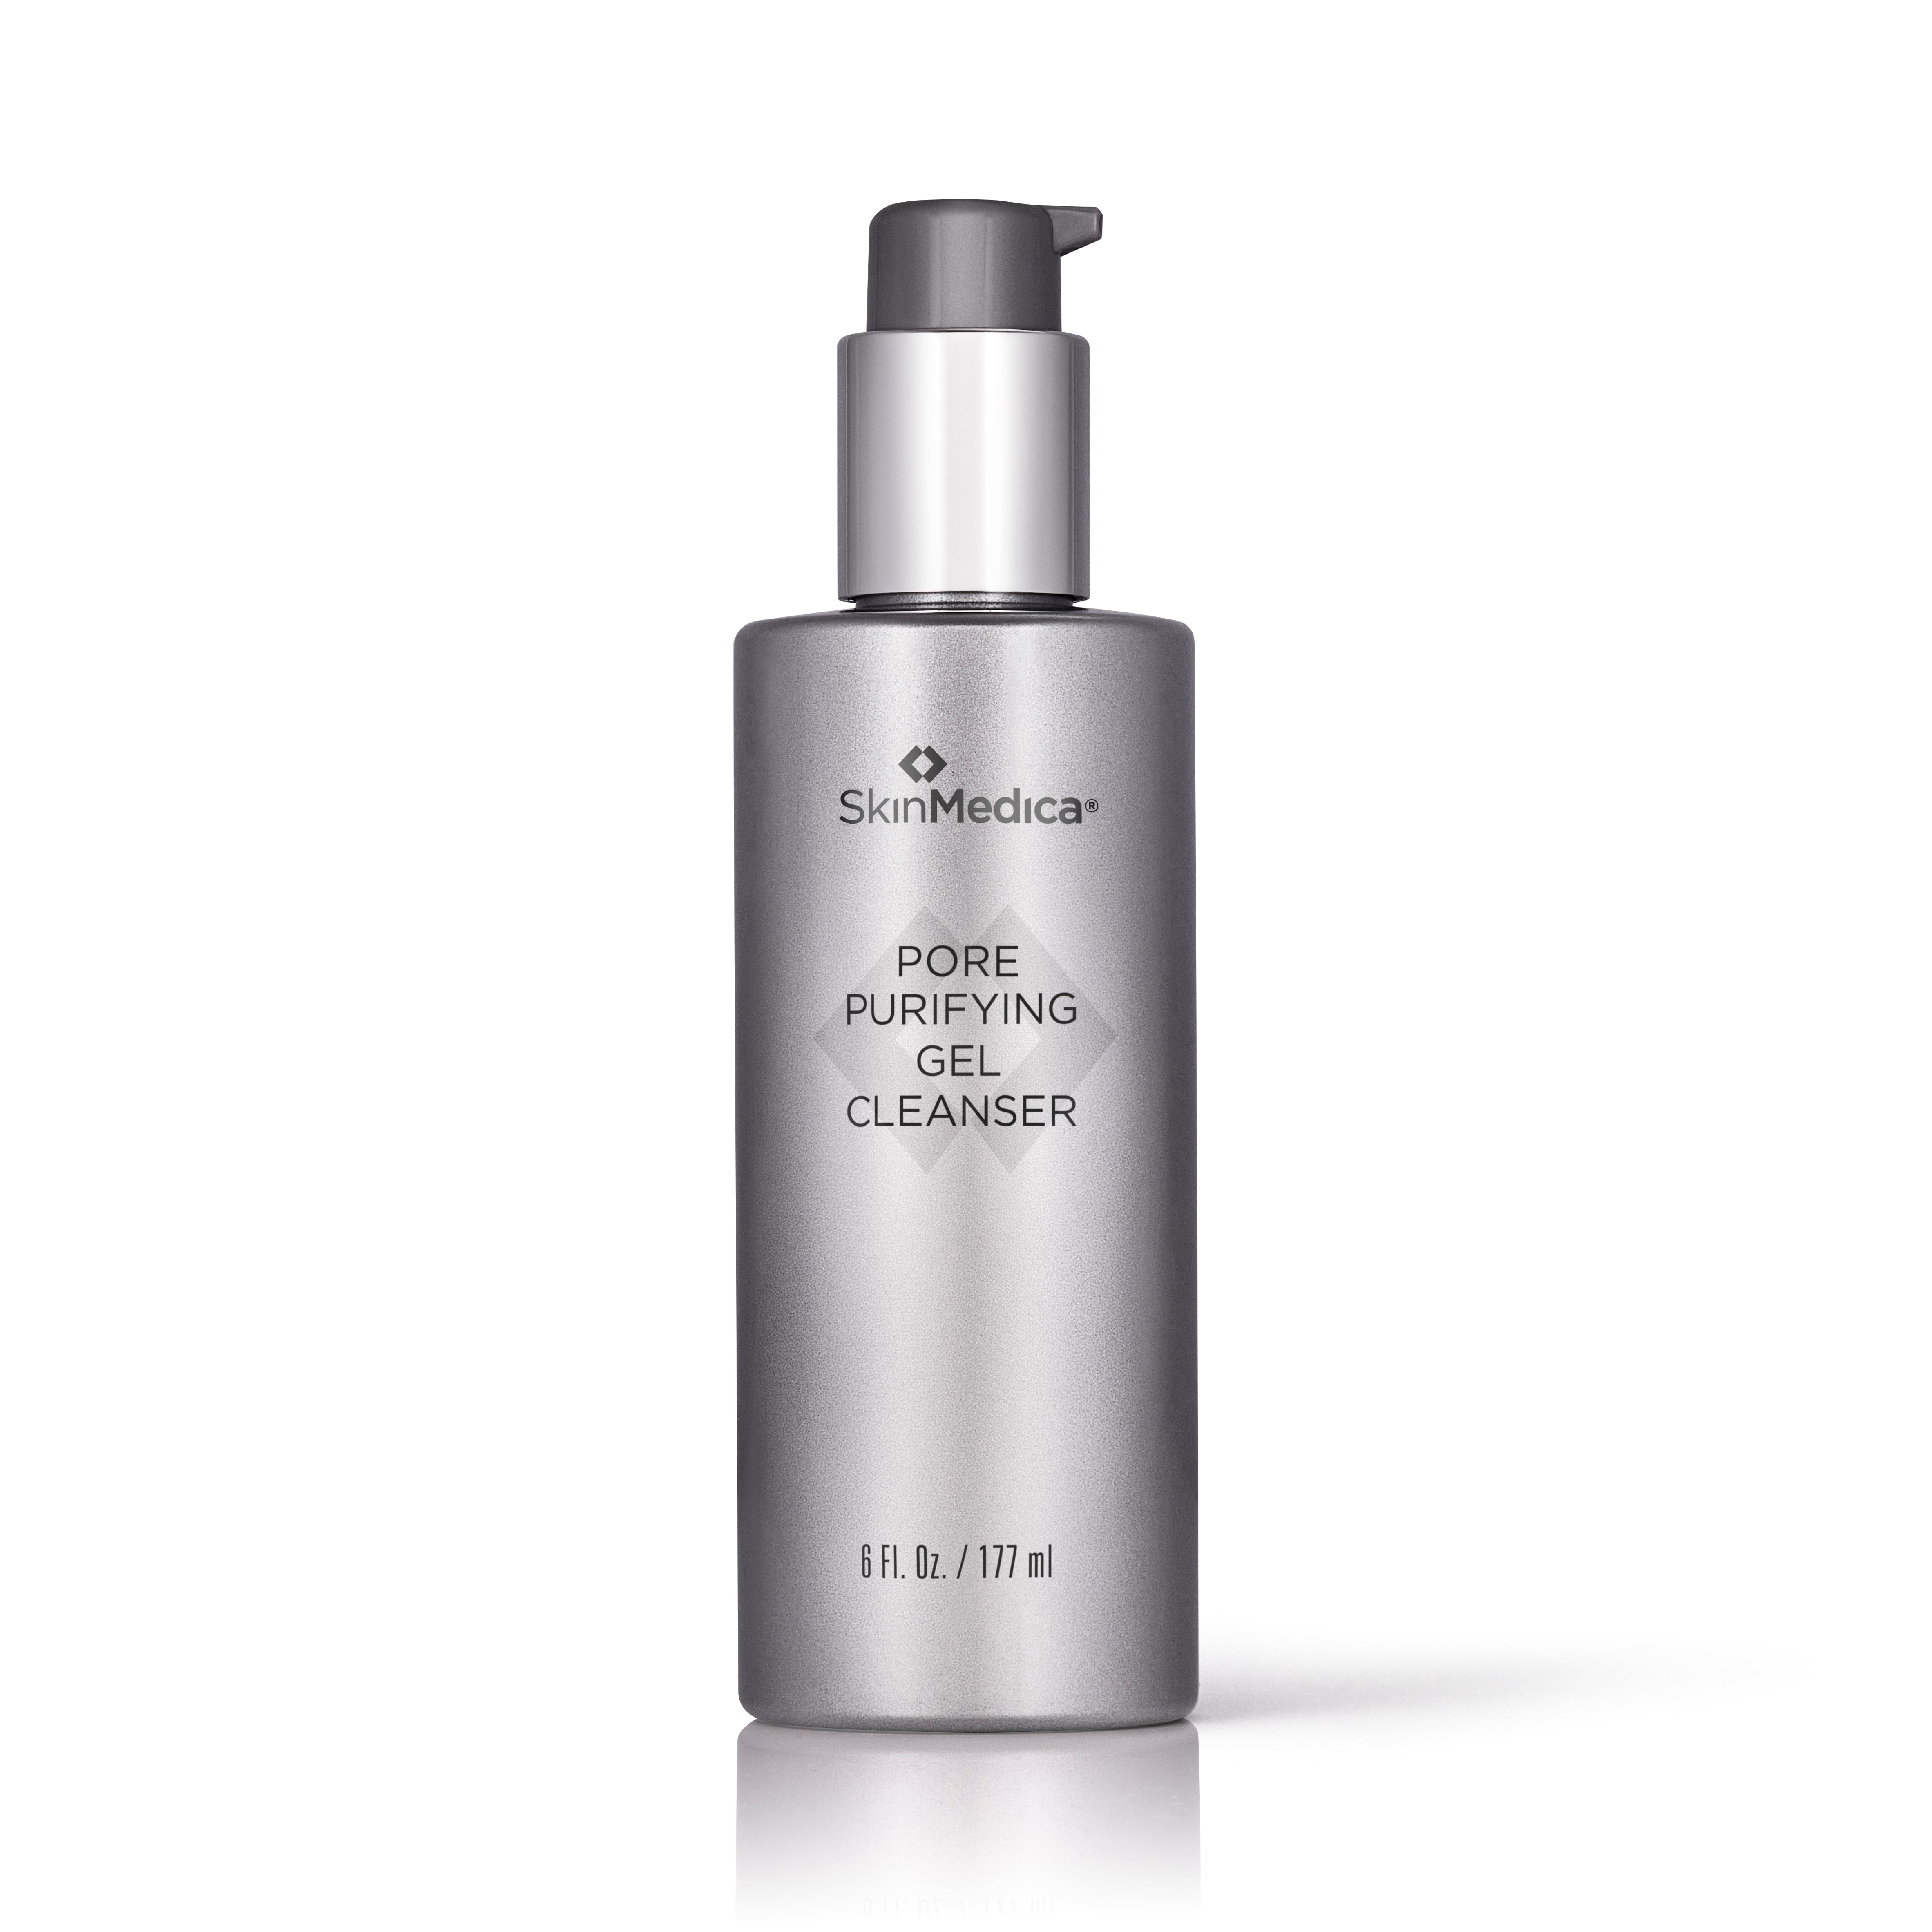 SkinMedica Pore Purifying Gel Cleanser Shop At Exclusive Beauty